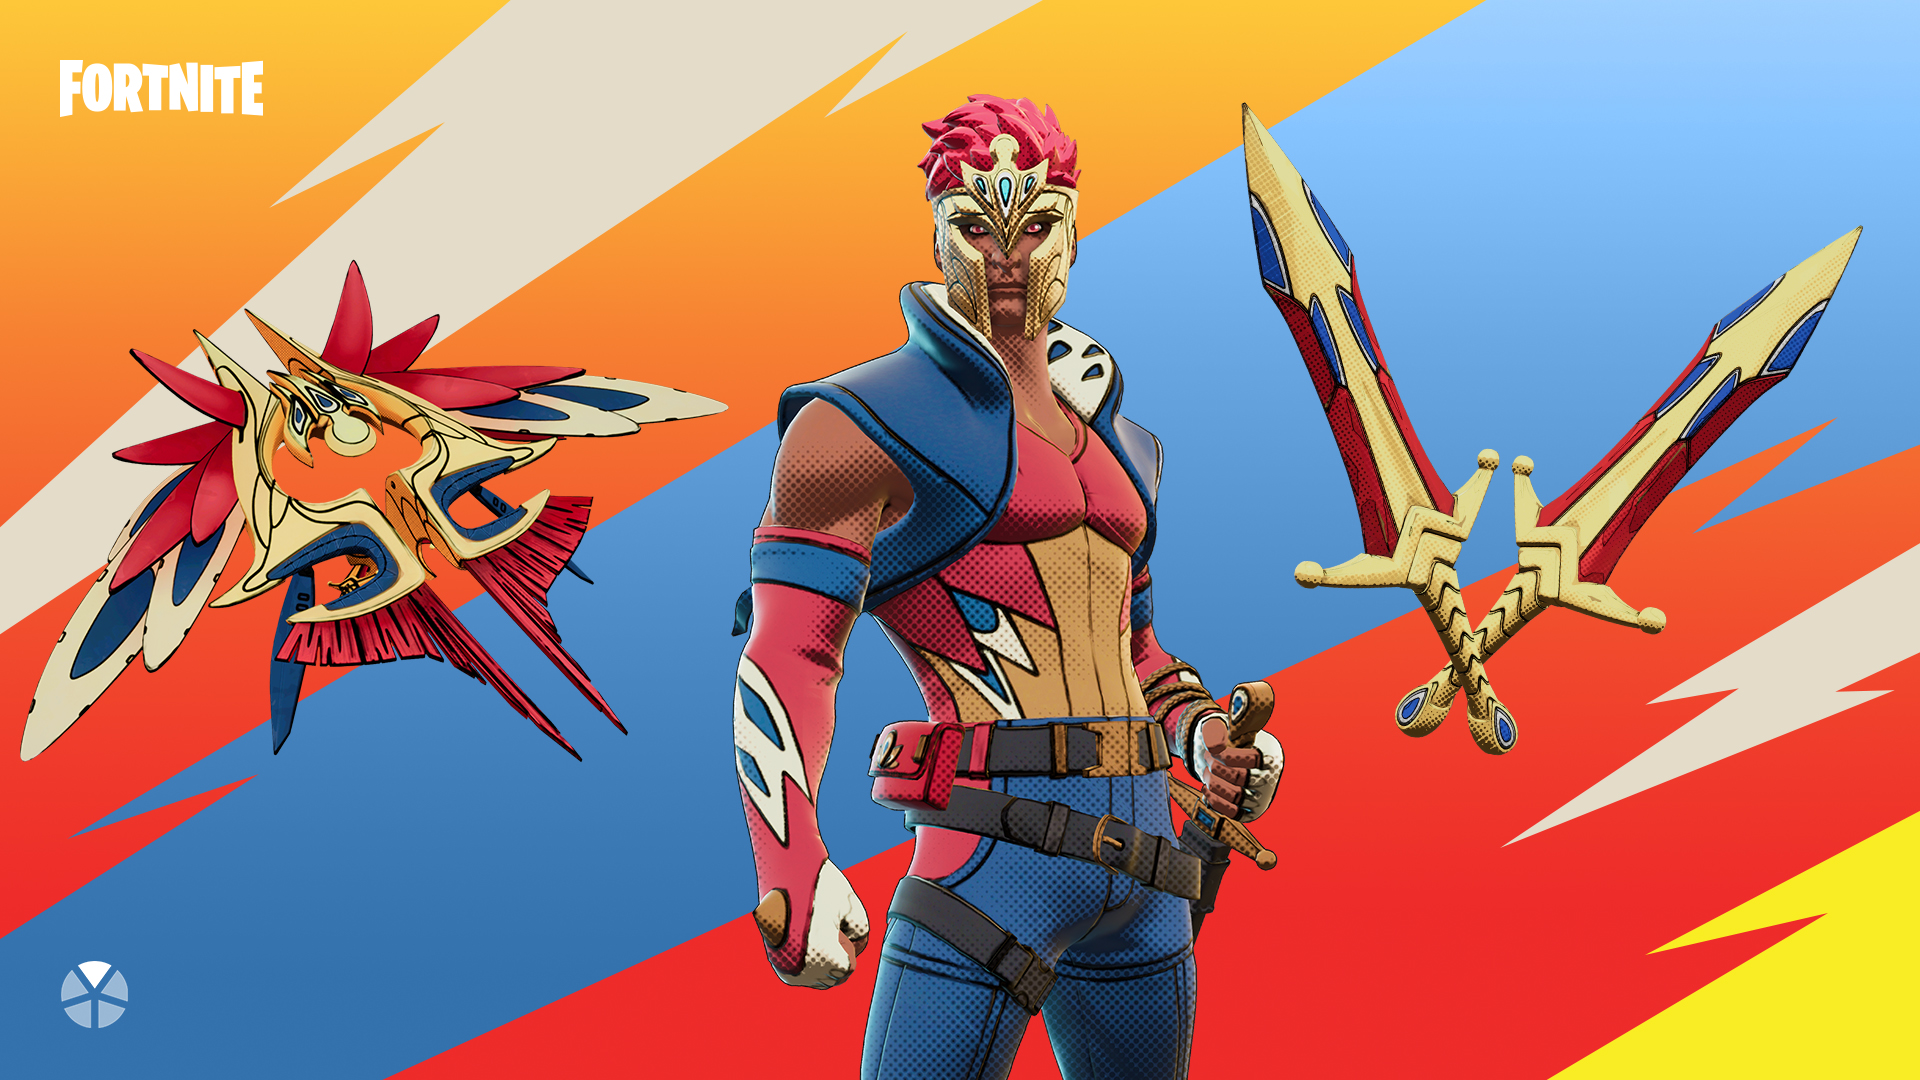 Antheia (Hyacinth) Fortnite Wallpapers